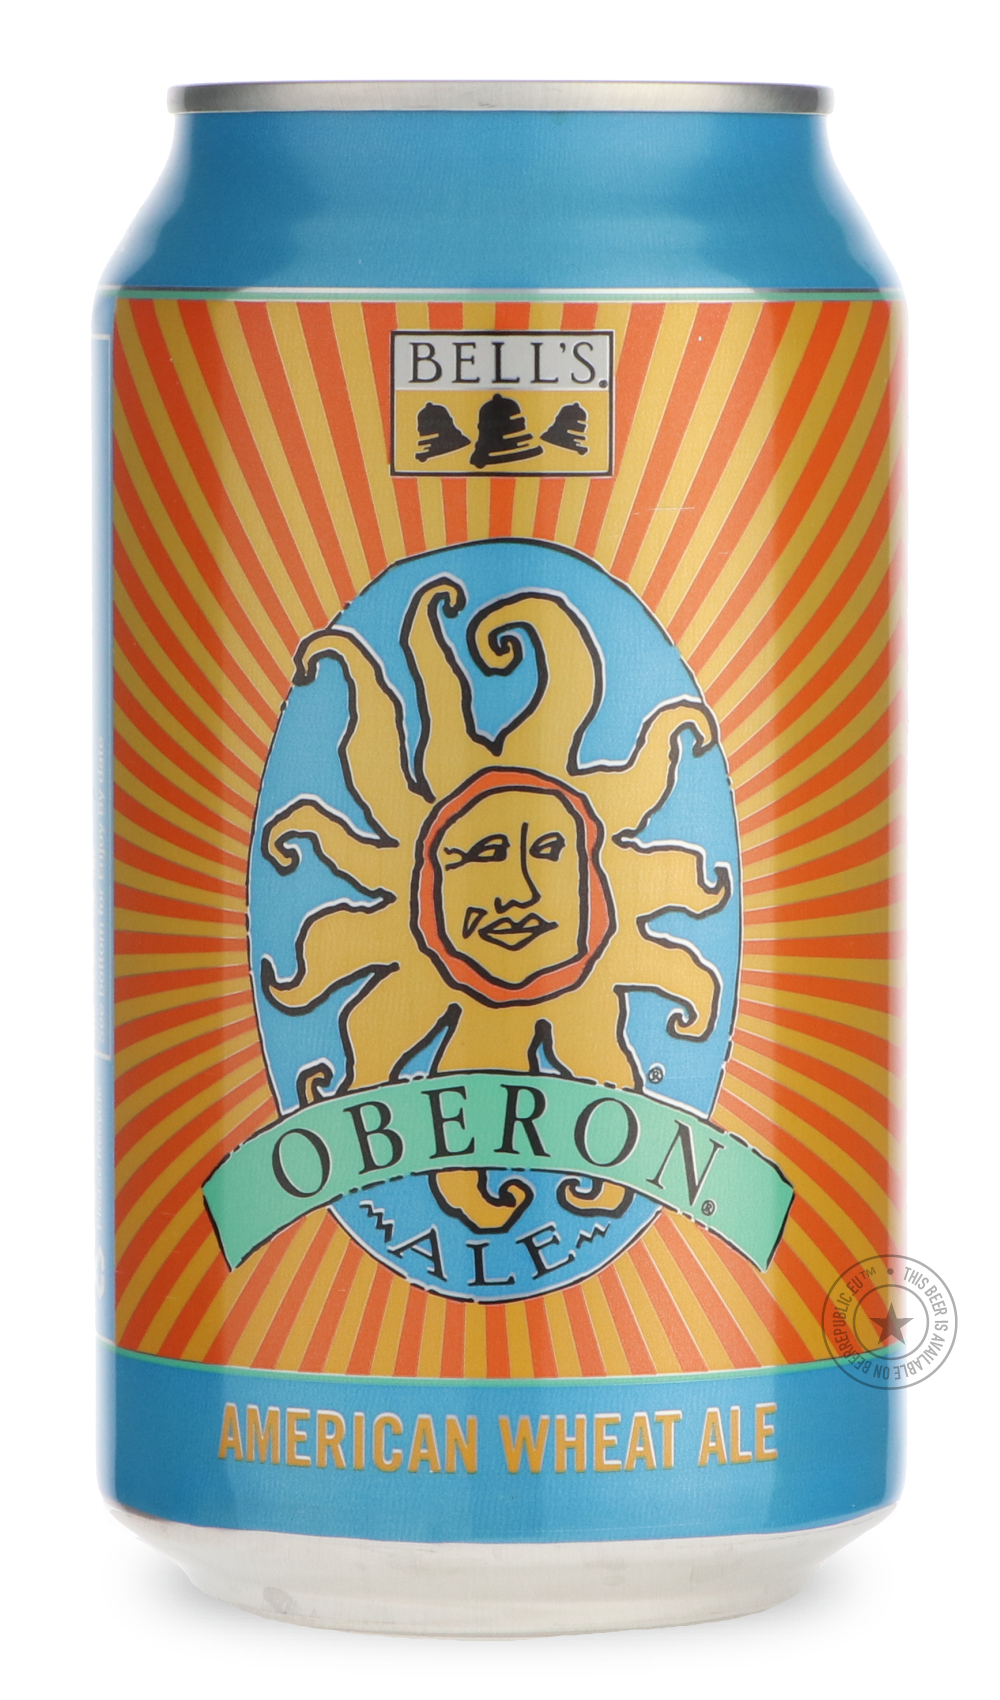 -Bell's- Oberon-Pale- Only @ Beer Republic - The best online beer store for American & Canadian craft beer - Buy beer online from the USA and Canada - Bier online kopen - Amerikaans bier kopen - Craft beer store - Craft beer kopen - Amerikanisch bier kaufen - Bier online kaufen - Acheter biere online - IPA - Stout - Porter - New England IPA - Hazy IPA - Imperial Stout - Barrel Aged - Barrel Aged Imperial Stout - Brown - Dark beer - Blond - Blonde - Pilsner - Lager - Wheat - Weizen - Amber - Barley Wine - Qu